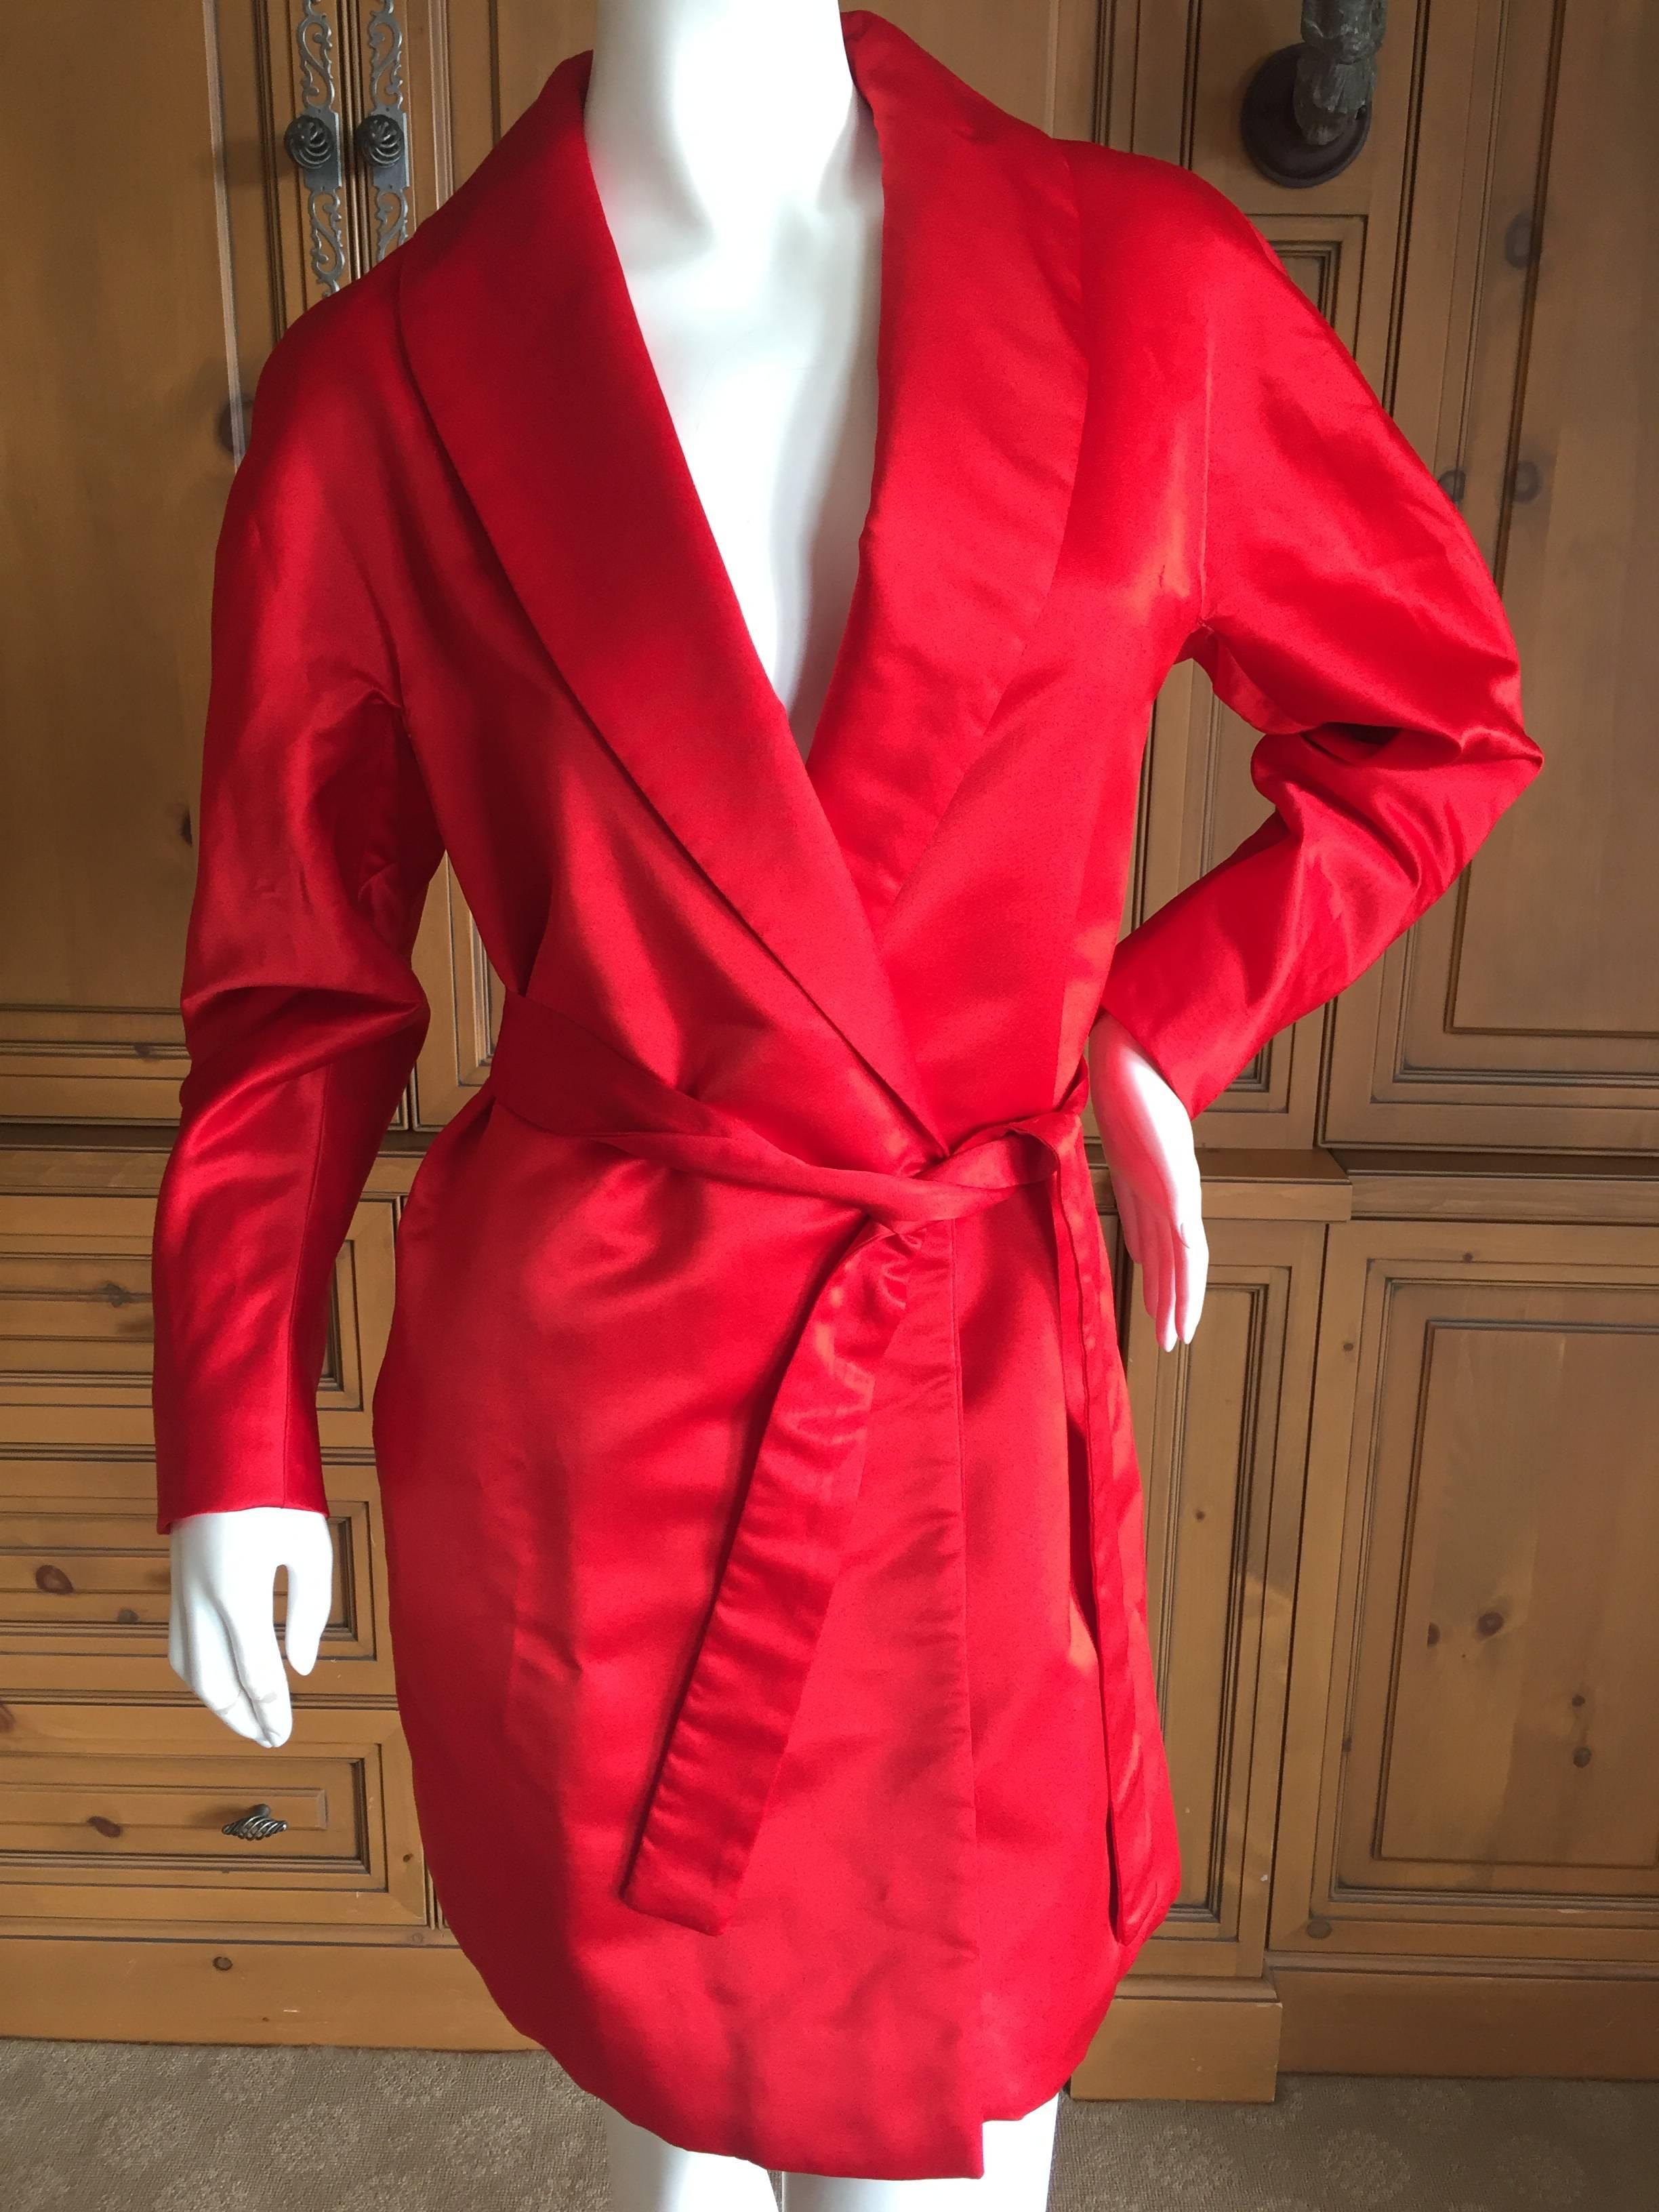 Halston Vintage Seventies Silk Faille Evening Coat.
Rich saturated red ,  with belt, this is the perfect eye popping evening coat from the master of simplicity, Halston.
Bust 40